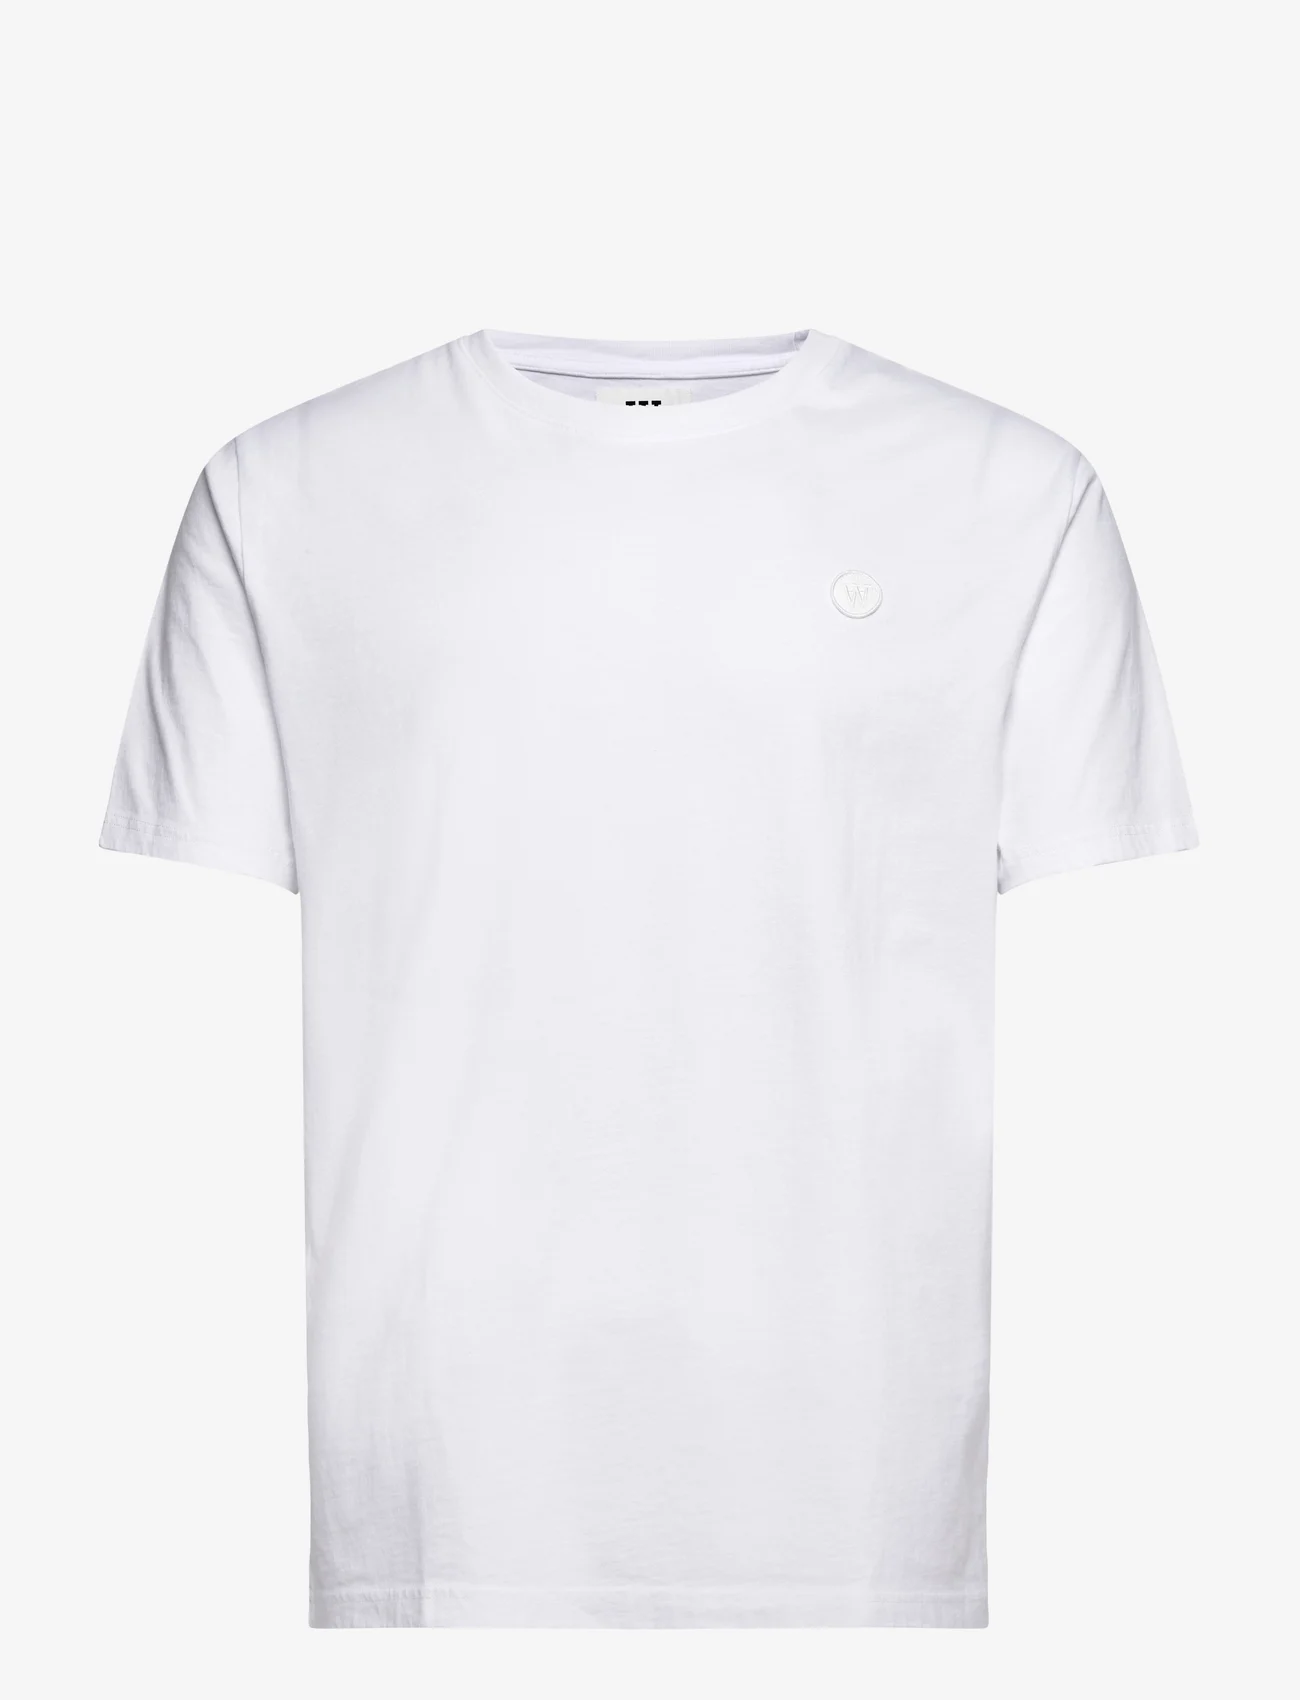 Double A by Wood Wood - Ace T-shirt - kortermede - white/white - 0